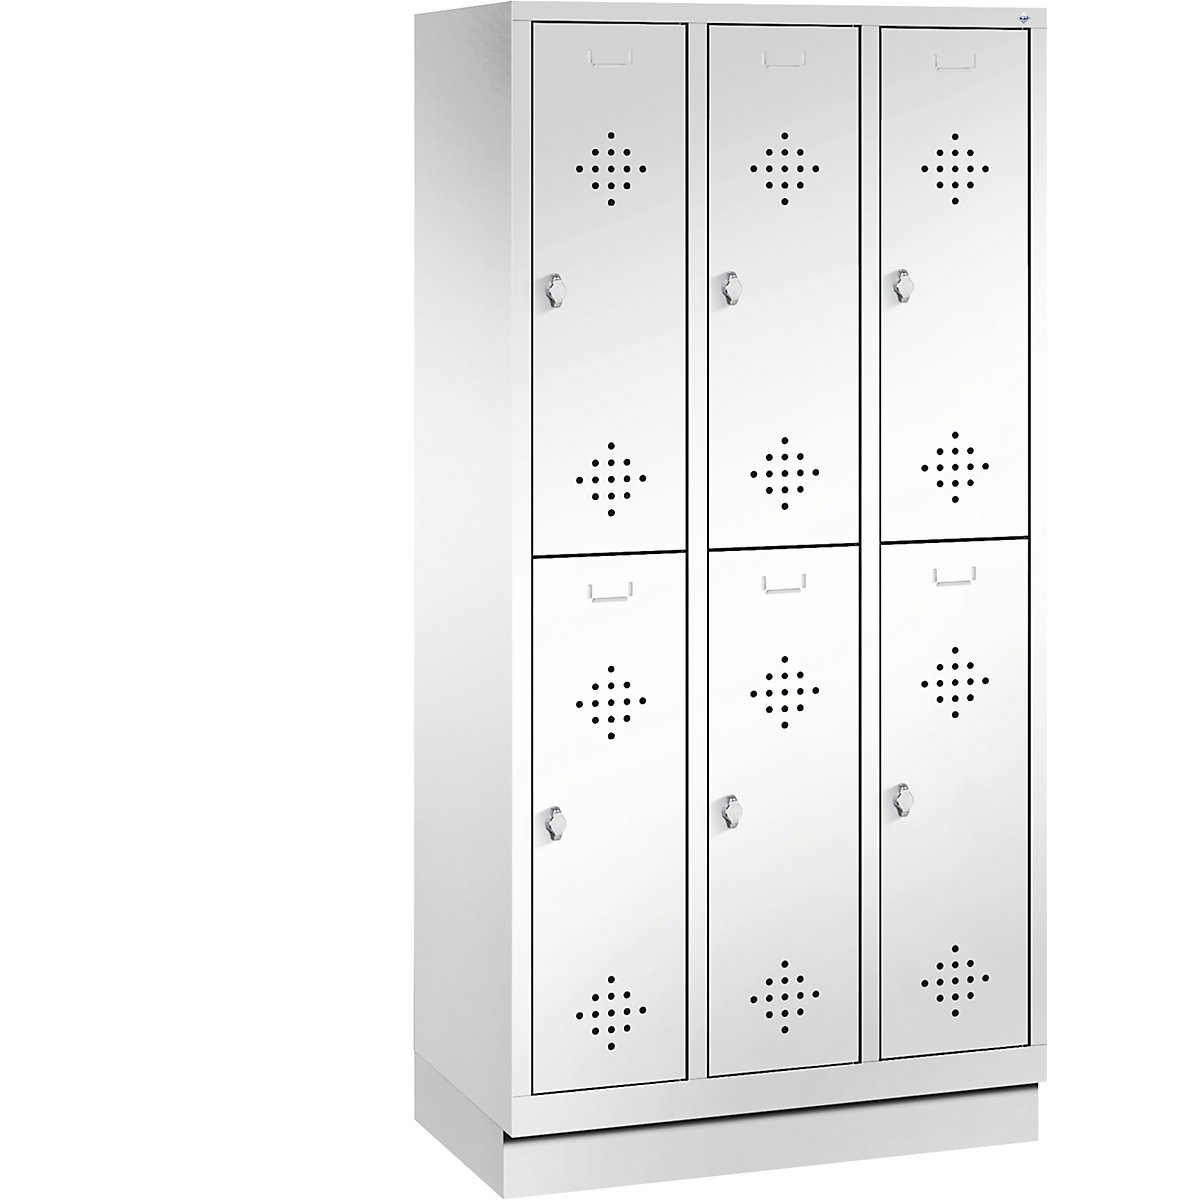 CLASSIC cloakroom locker with plinth, double tier – C+P, 3 compartments, 2 shelf compartments each, compartment width 300 mm, traffic white-9